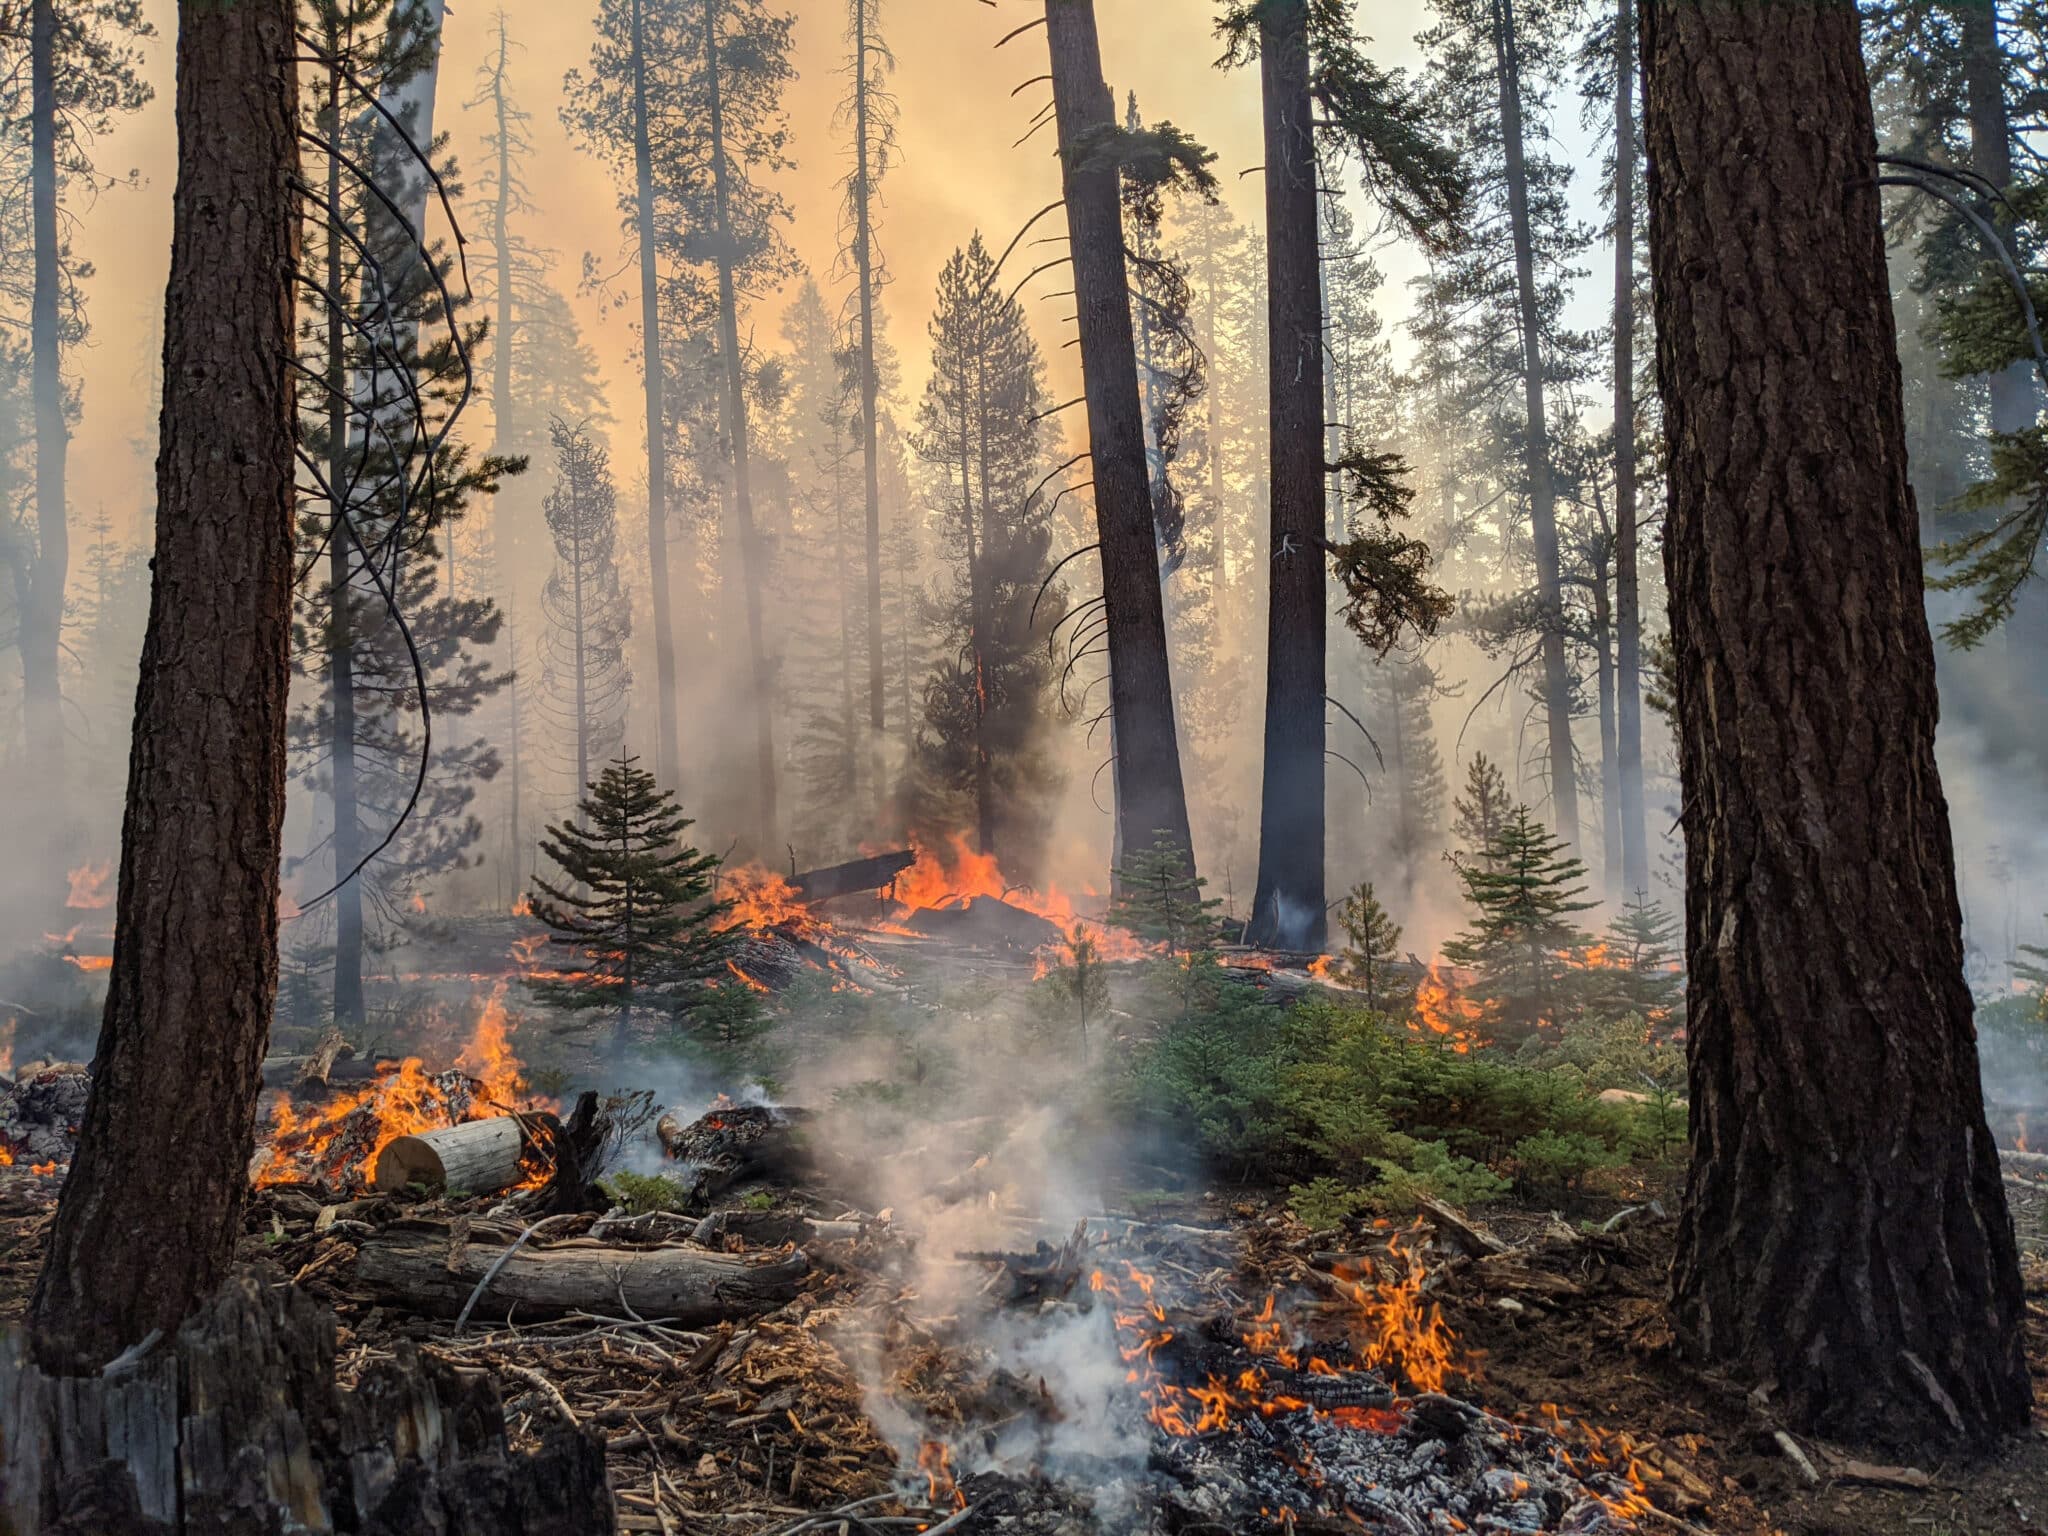 A fire spreads through Sequoia National Park